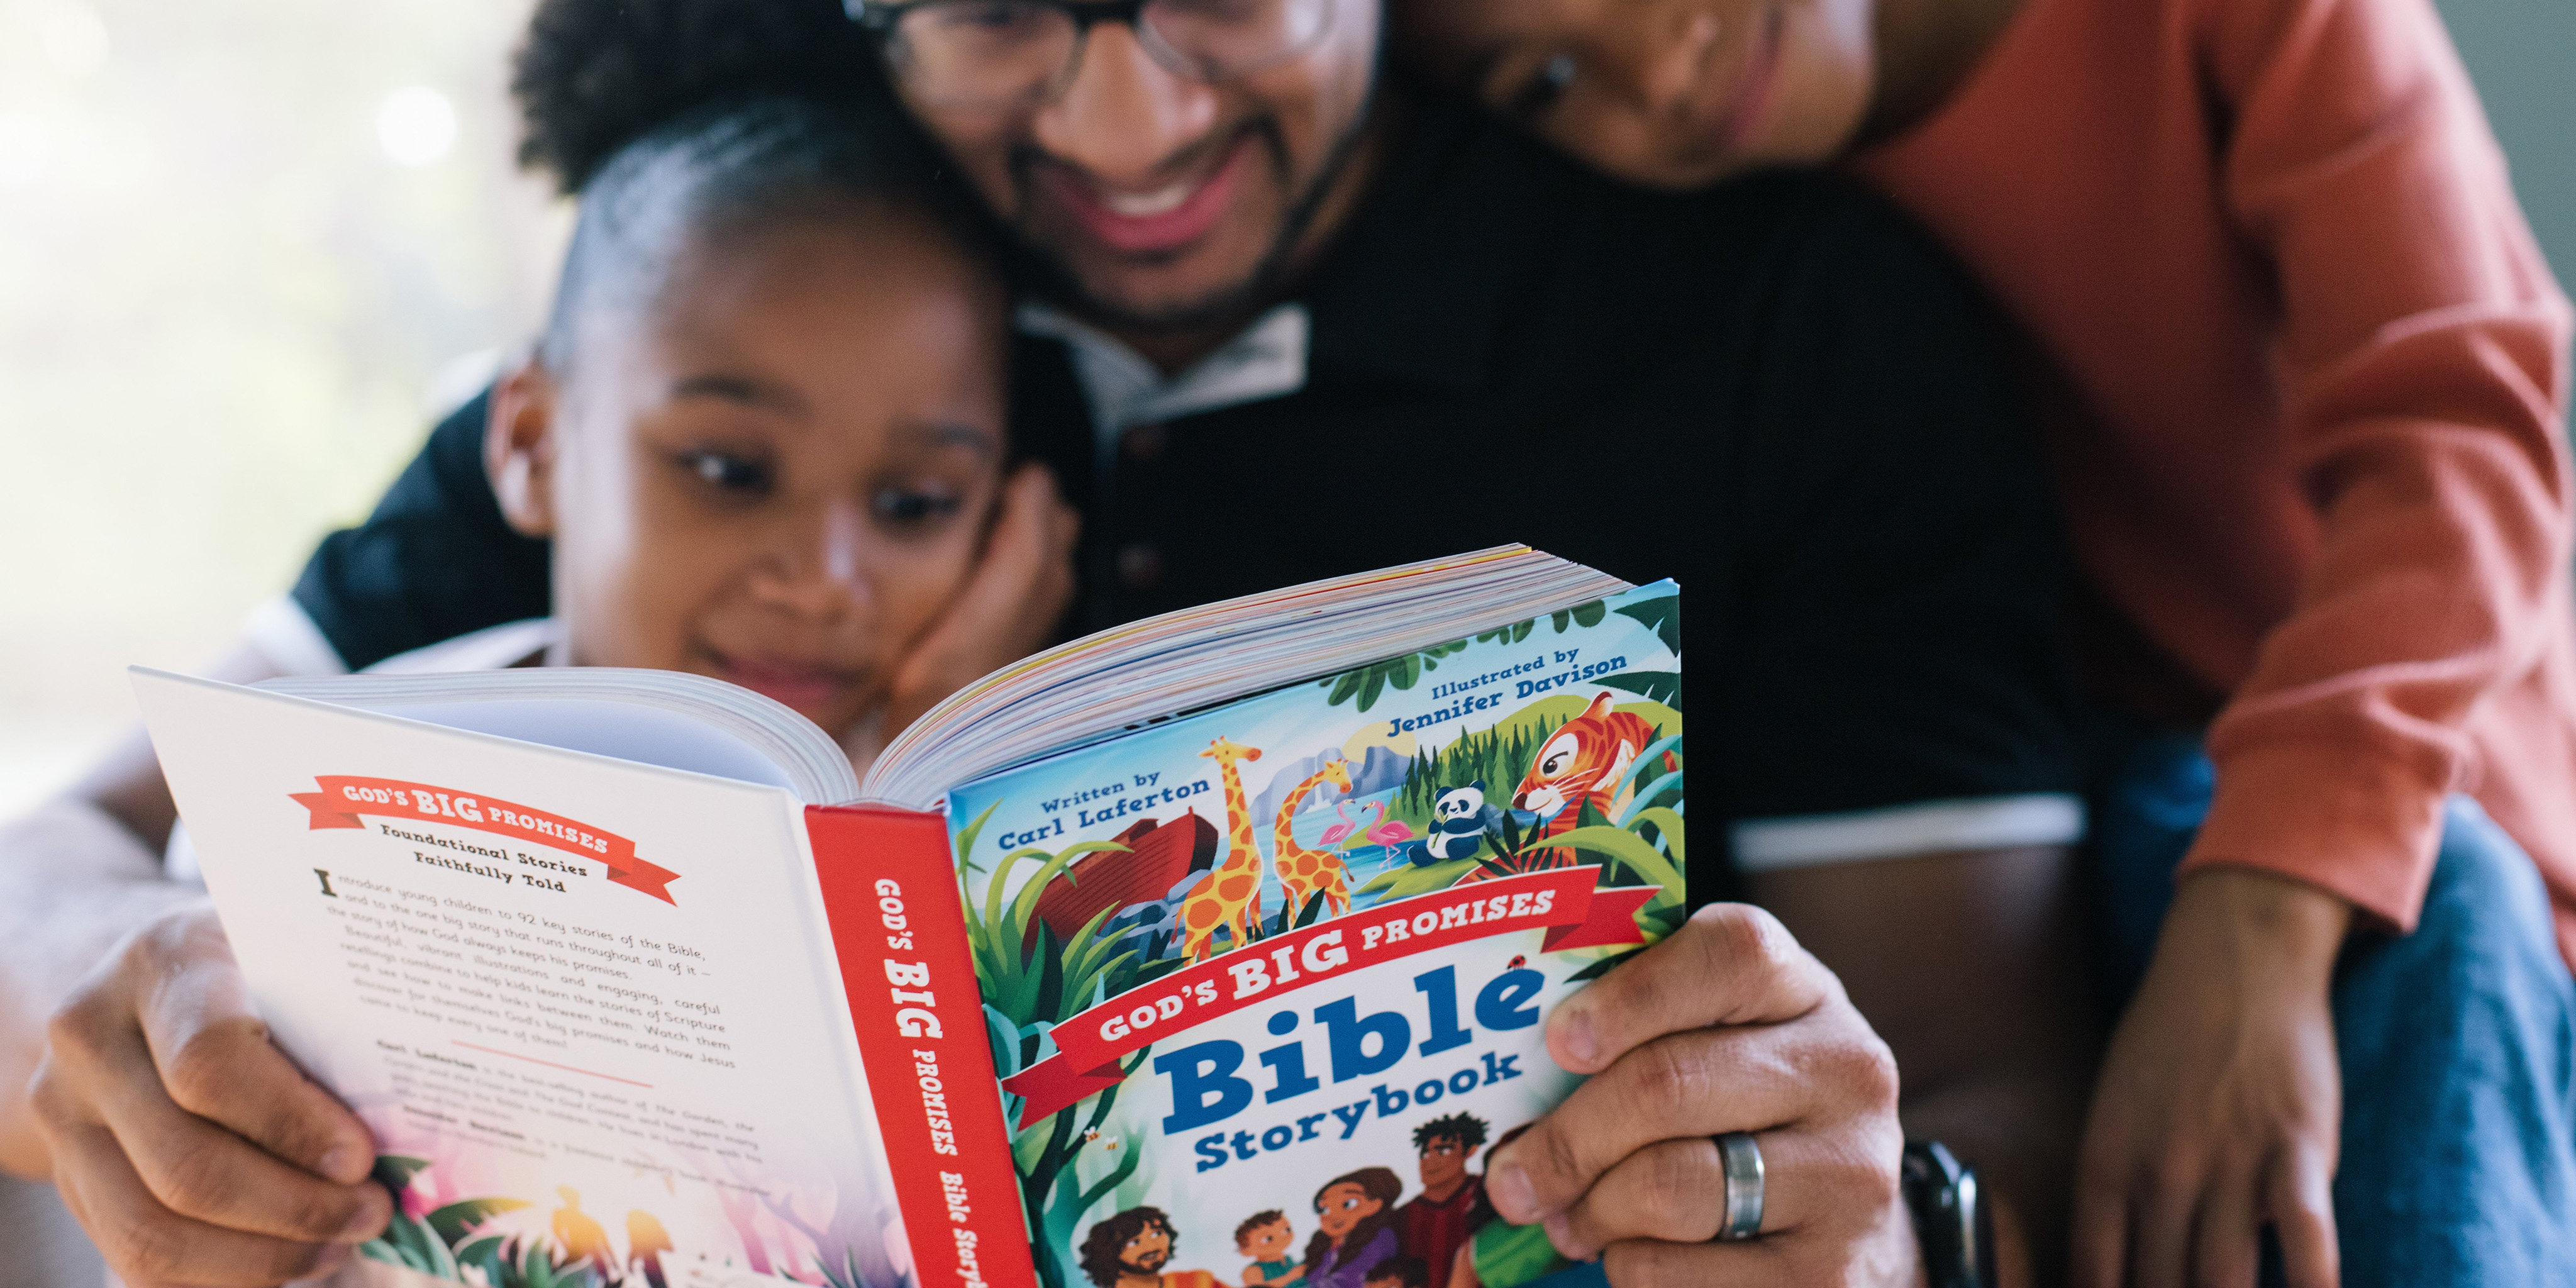 Photograph of two sons and a father. The father is seated and reading God's Big Promises Bible Storybook. The sons are standing on either side of the father looking at the Bible Storybook.